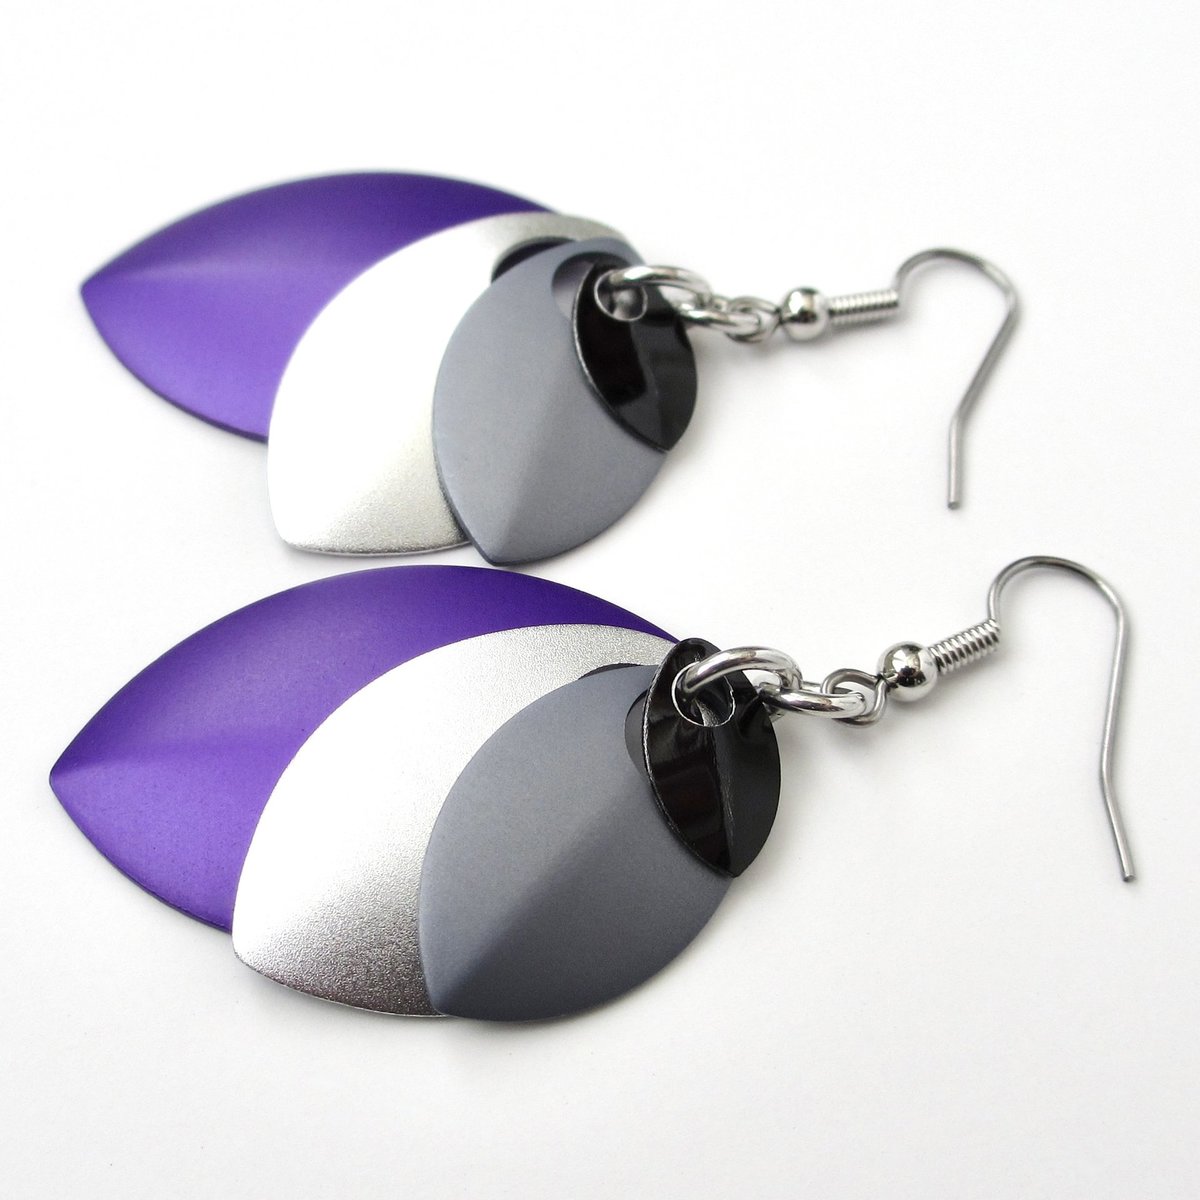 Asexual pride earrings, chainmail scales ace jewelry; black gray white purple